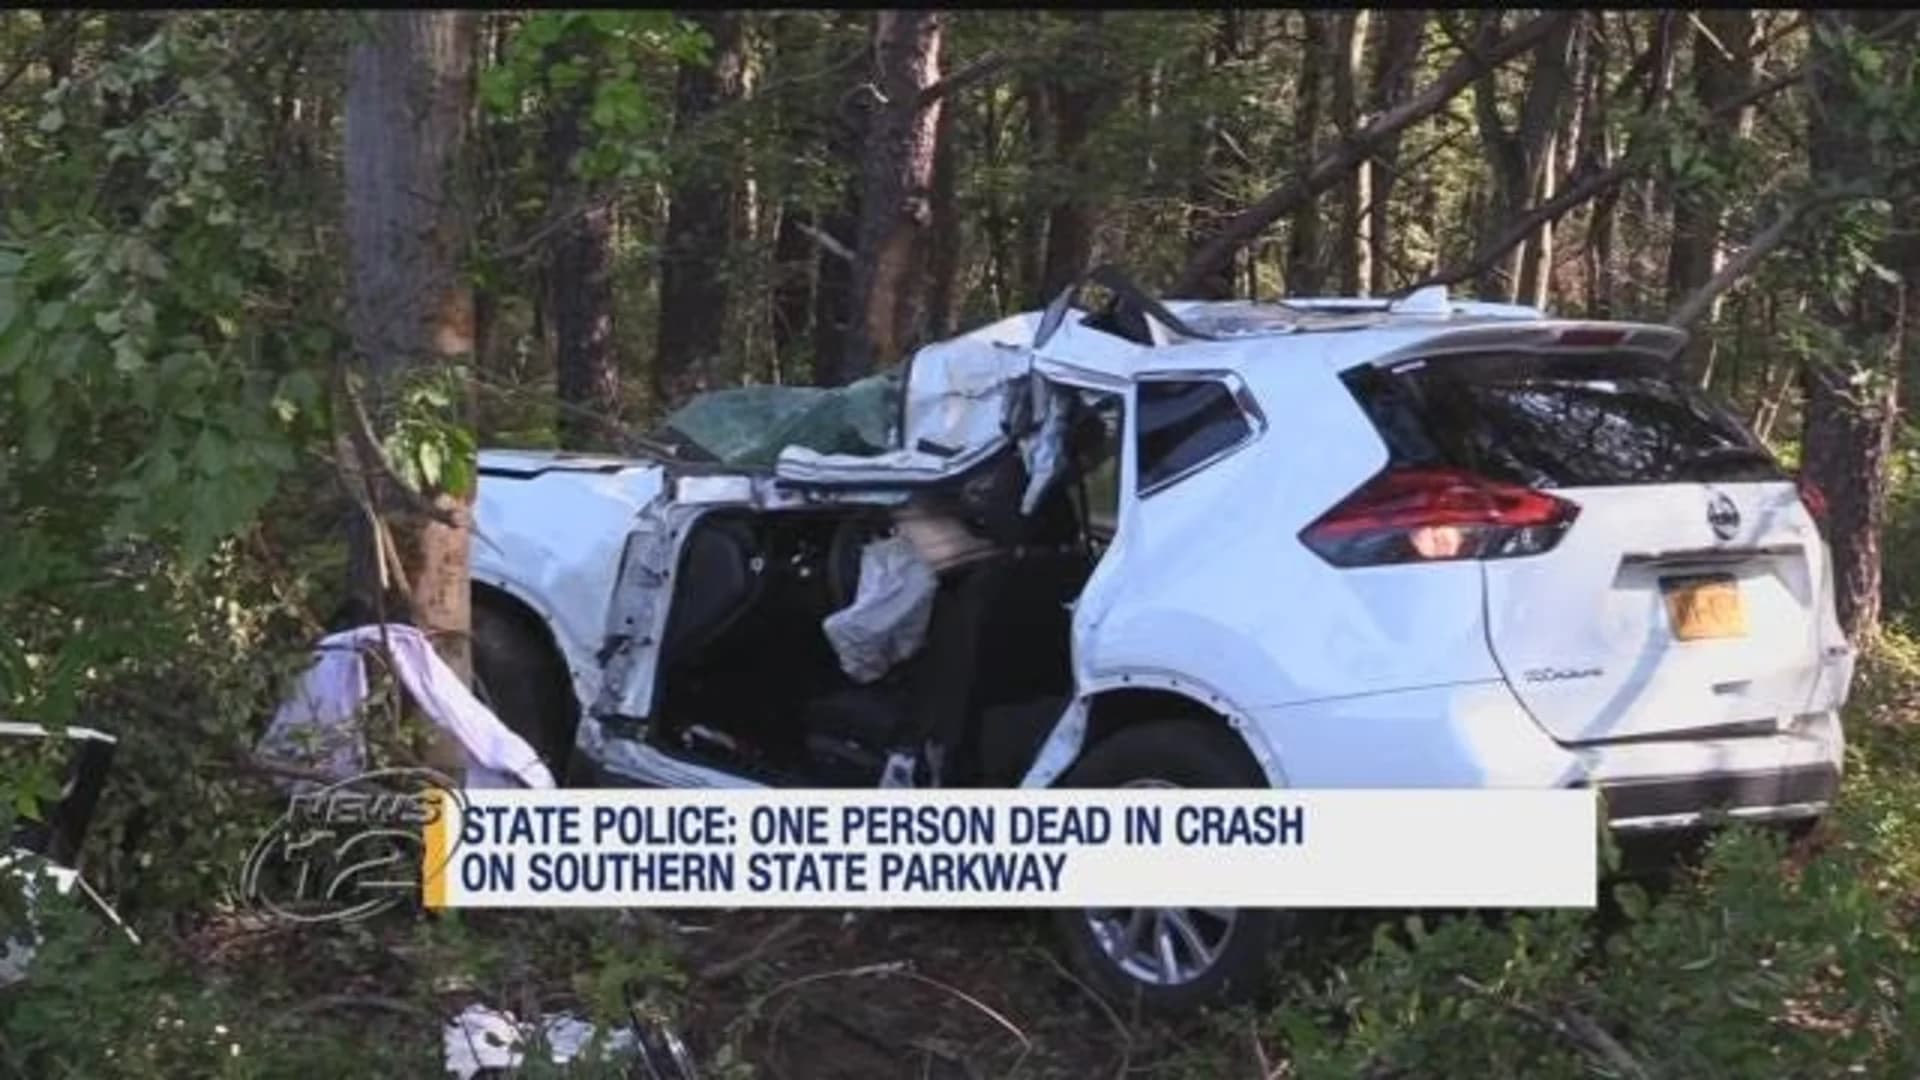 Police: 1 dead after car strikes tree on Southern State Parkway